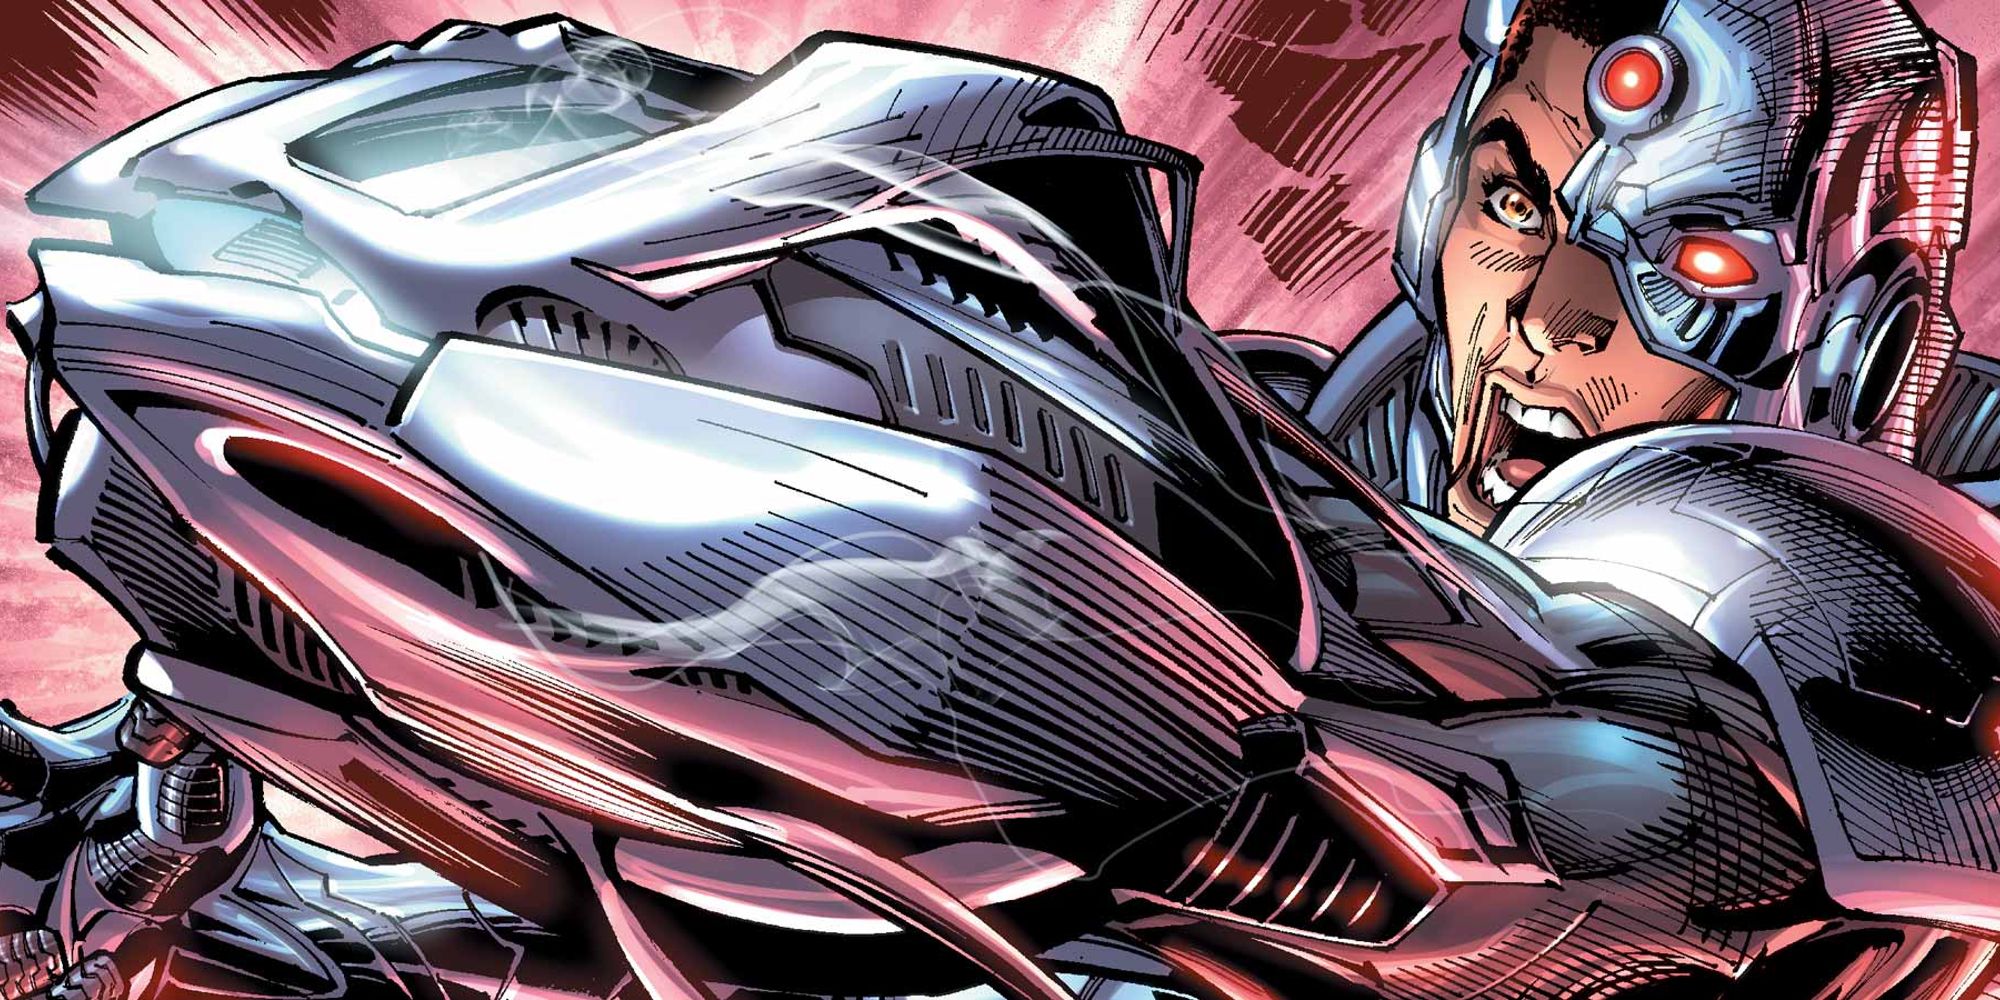 Cyborg aiming his arm cannon in DC comics